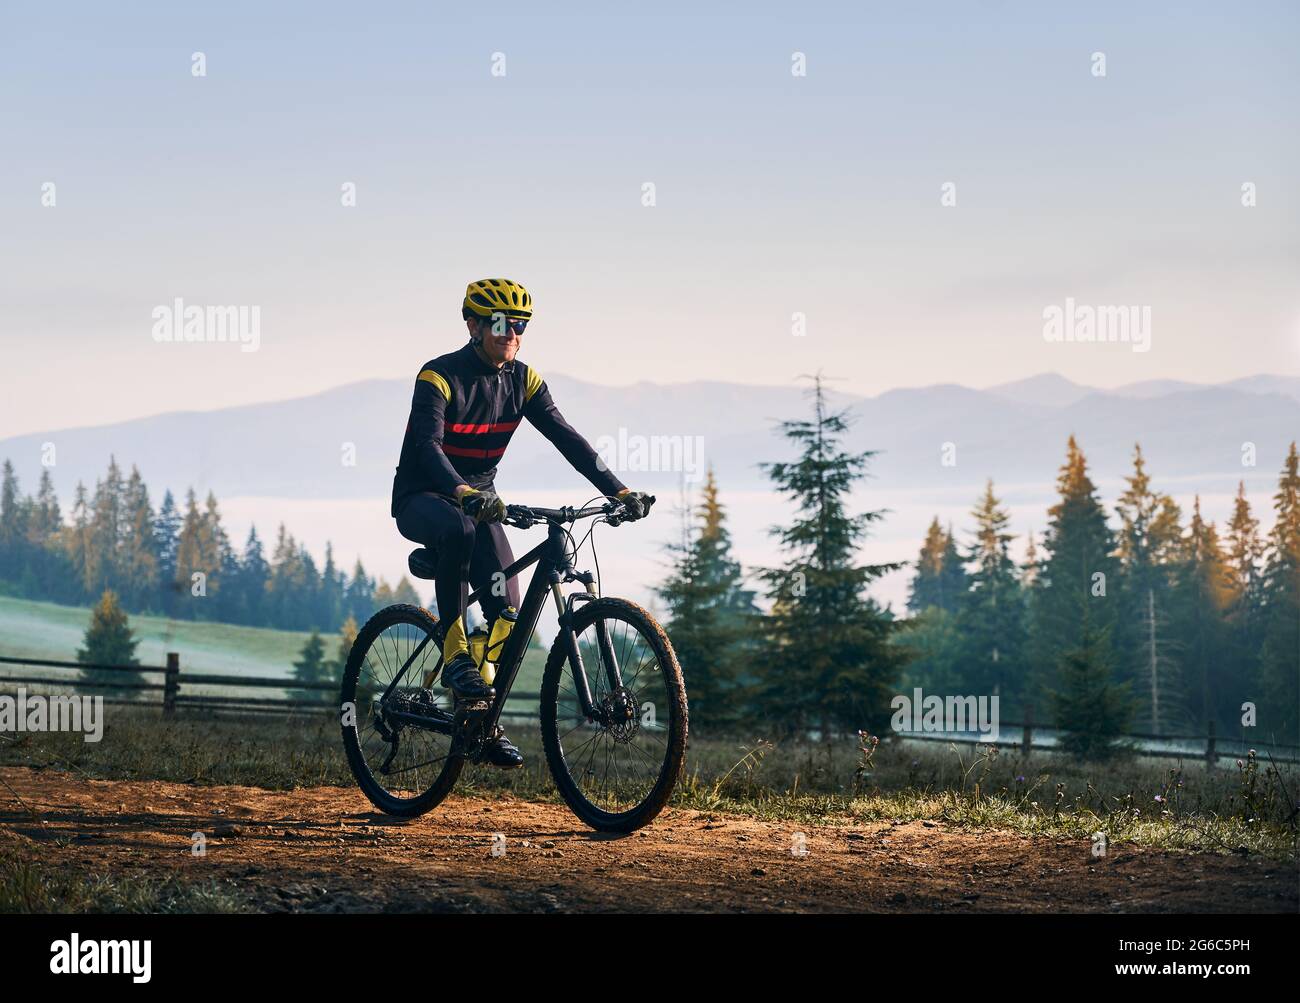 Happy cyclist in cycling suit riding bike on mountain road with coniferous trees and hills on background. Man bicyclist wearing safety helmet and glasses while enjoying bicycle ride in mountains. Stock Photo